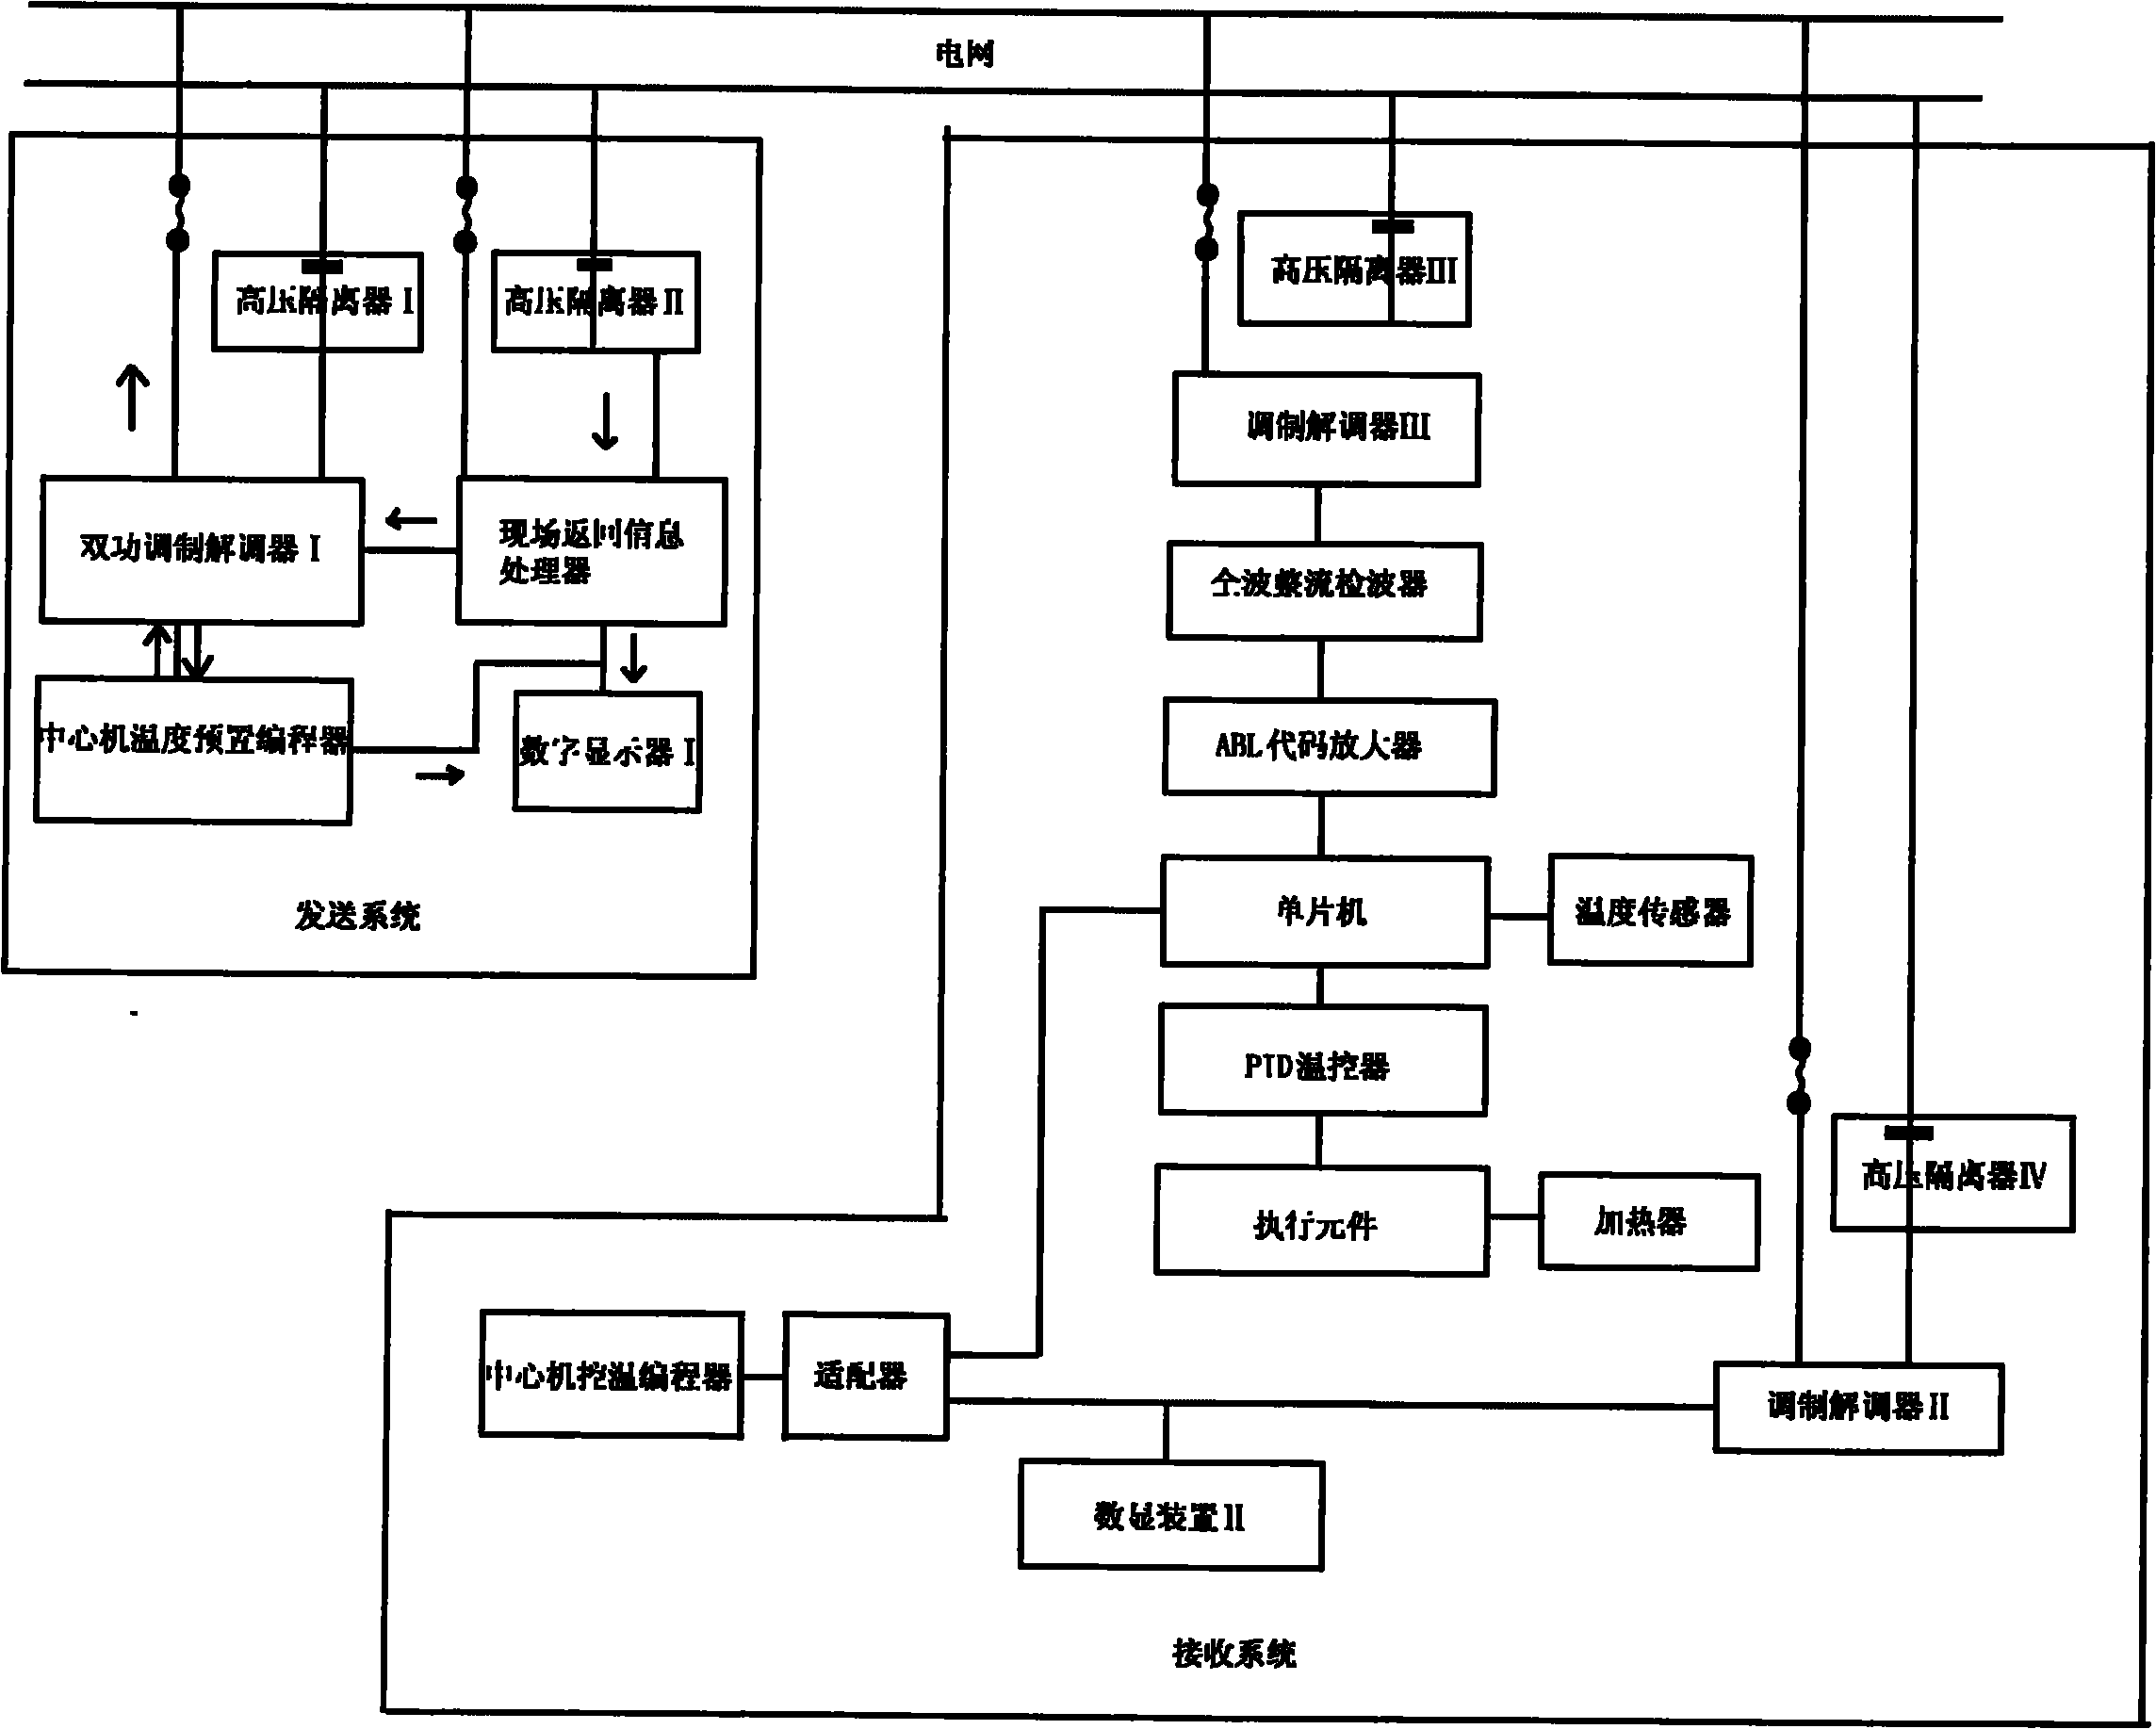 Remote temperature controller for transmitting computer temperature control information by using power line carrier